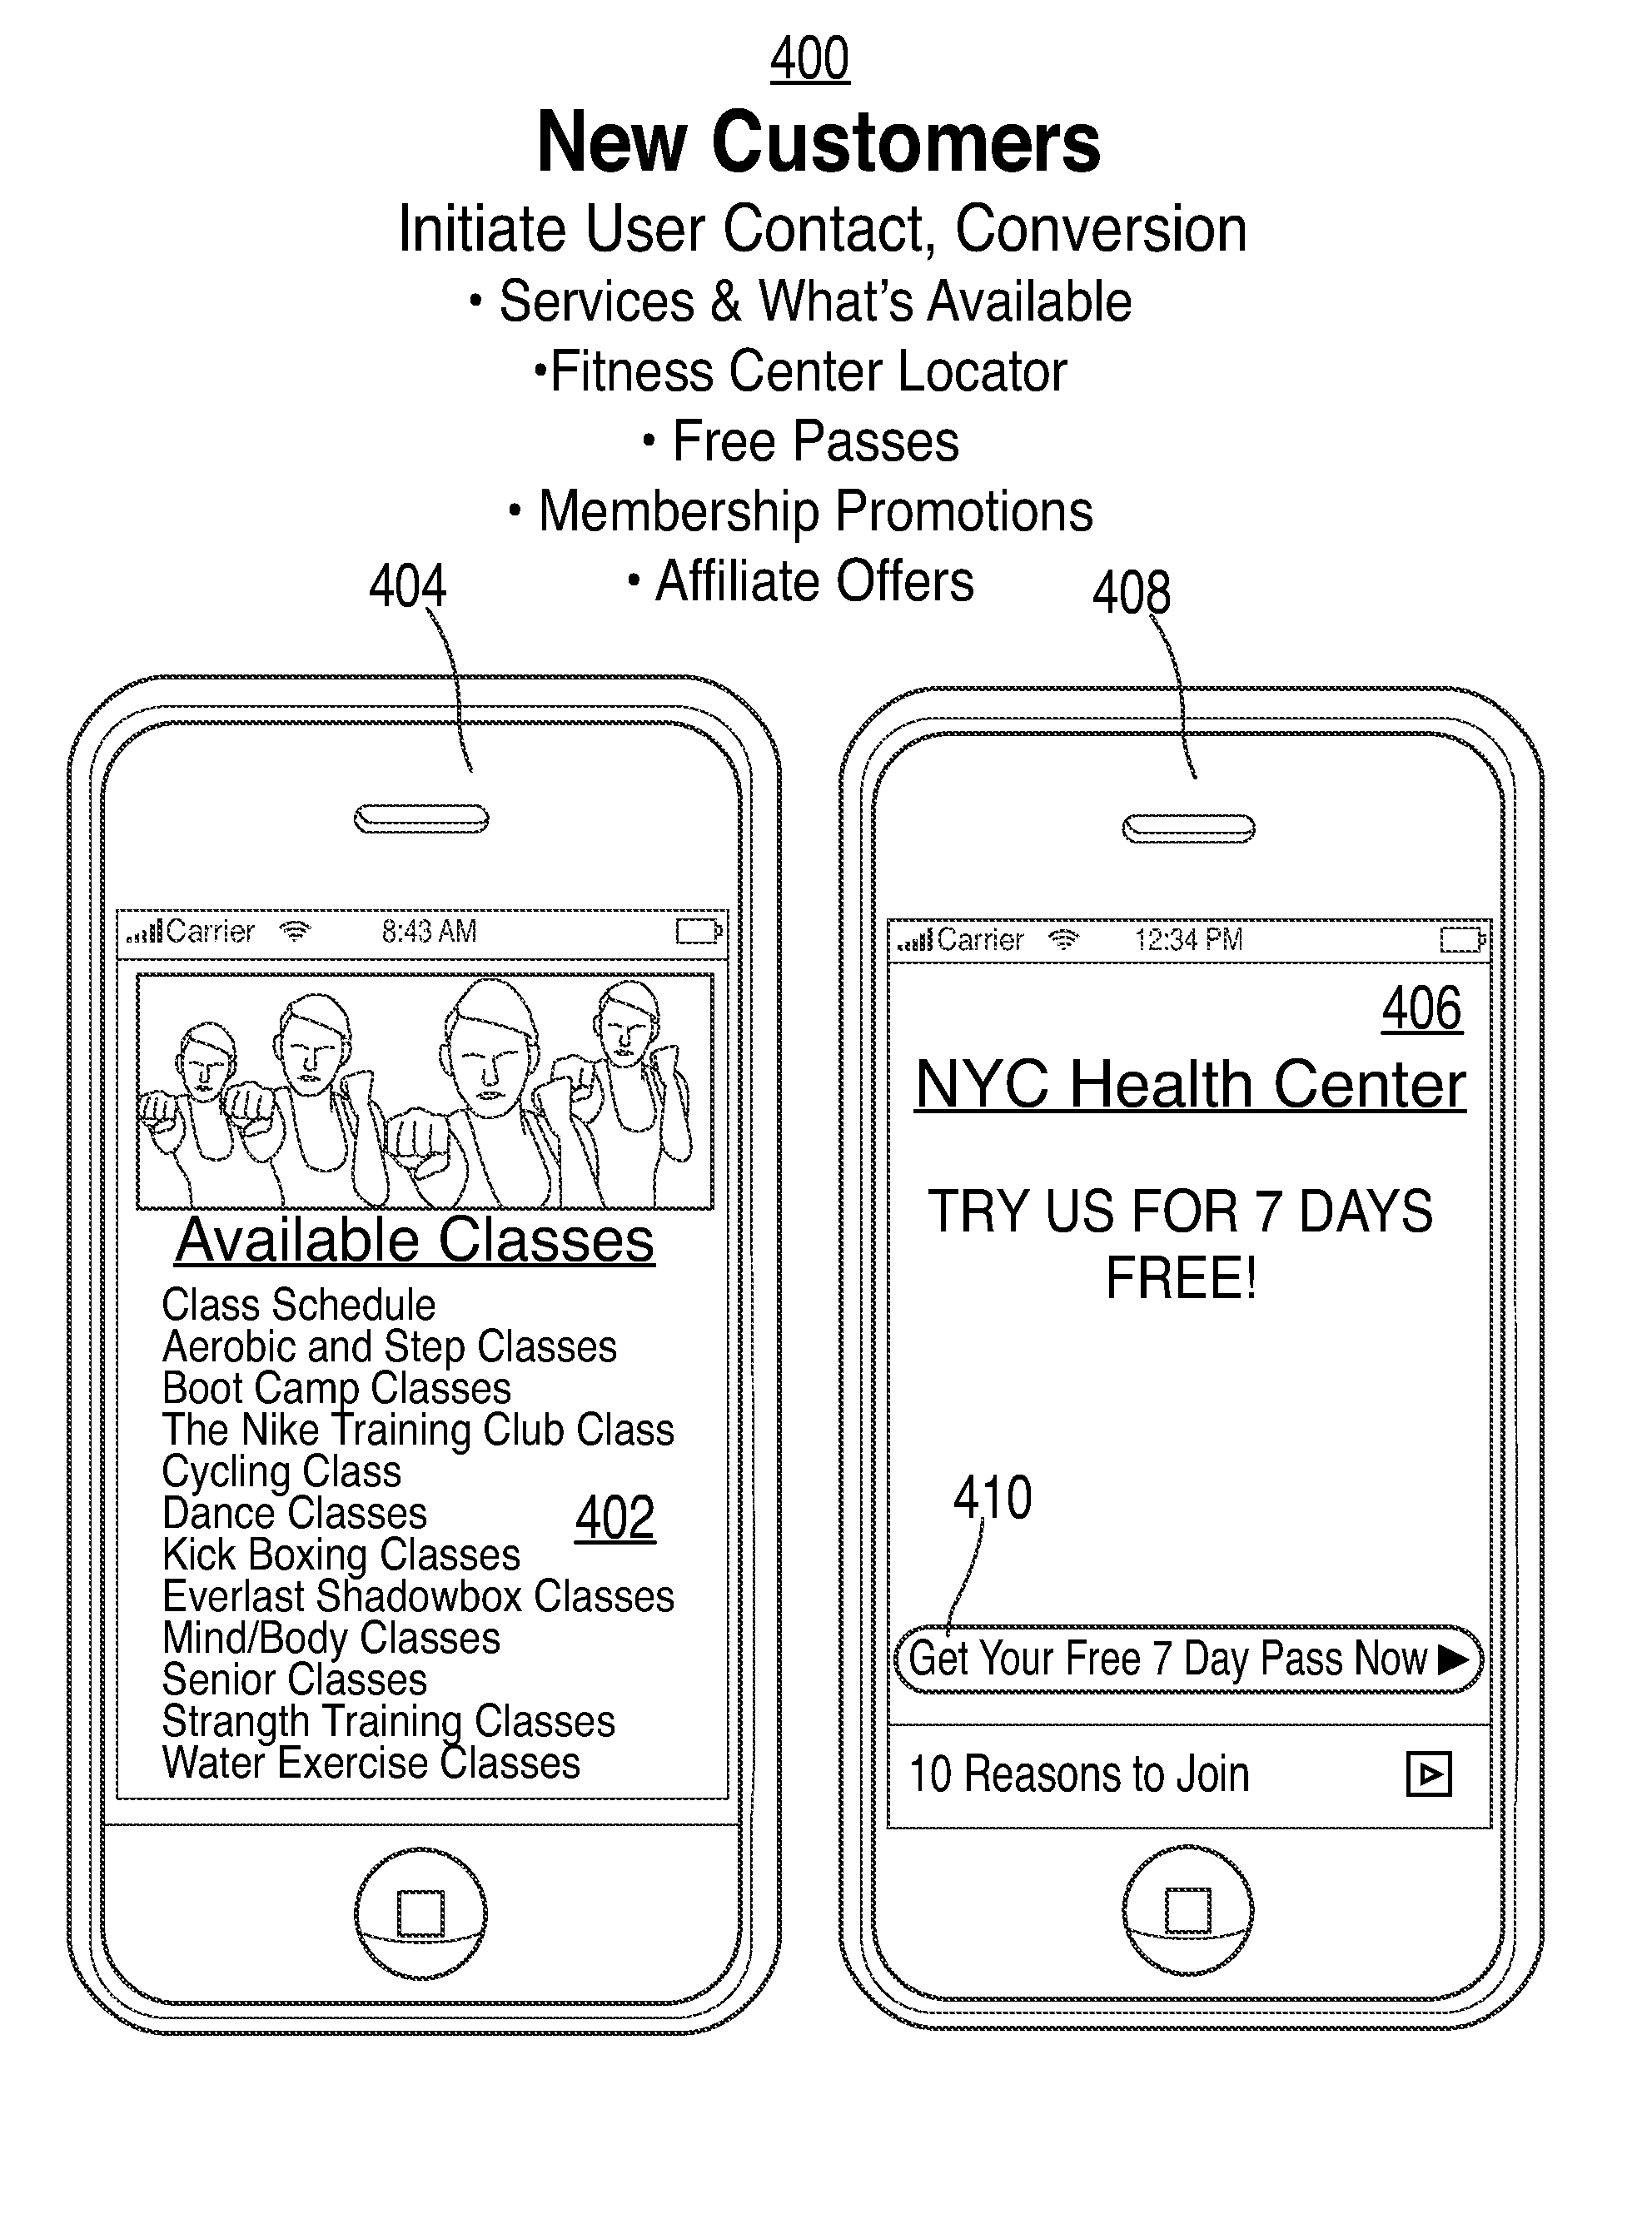 Systems and methods for accessing personalized fitness services using a portable electronic device